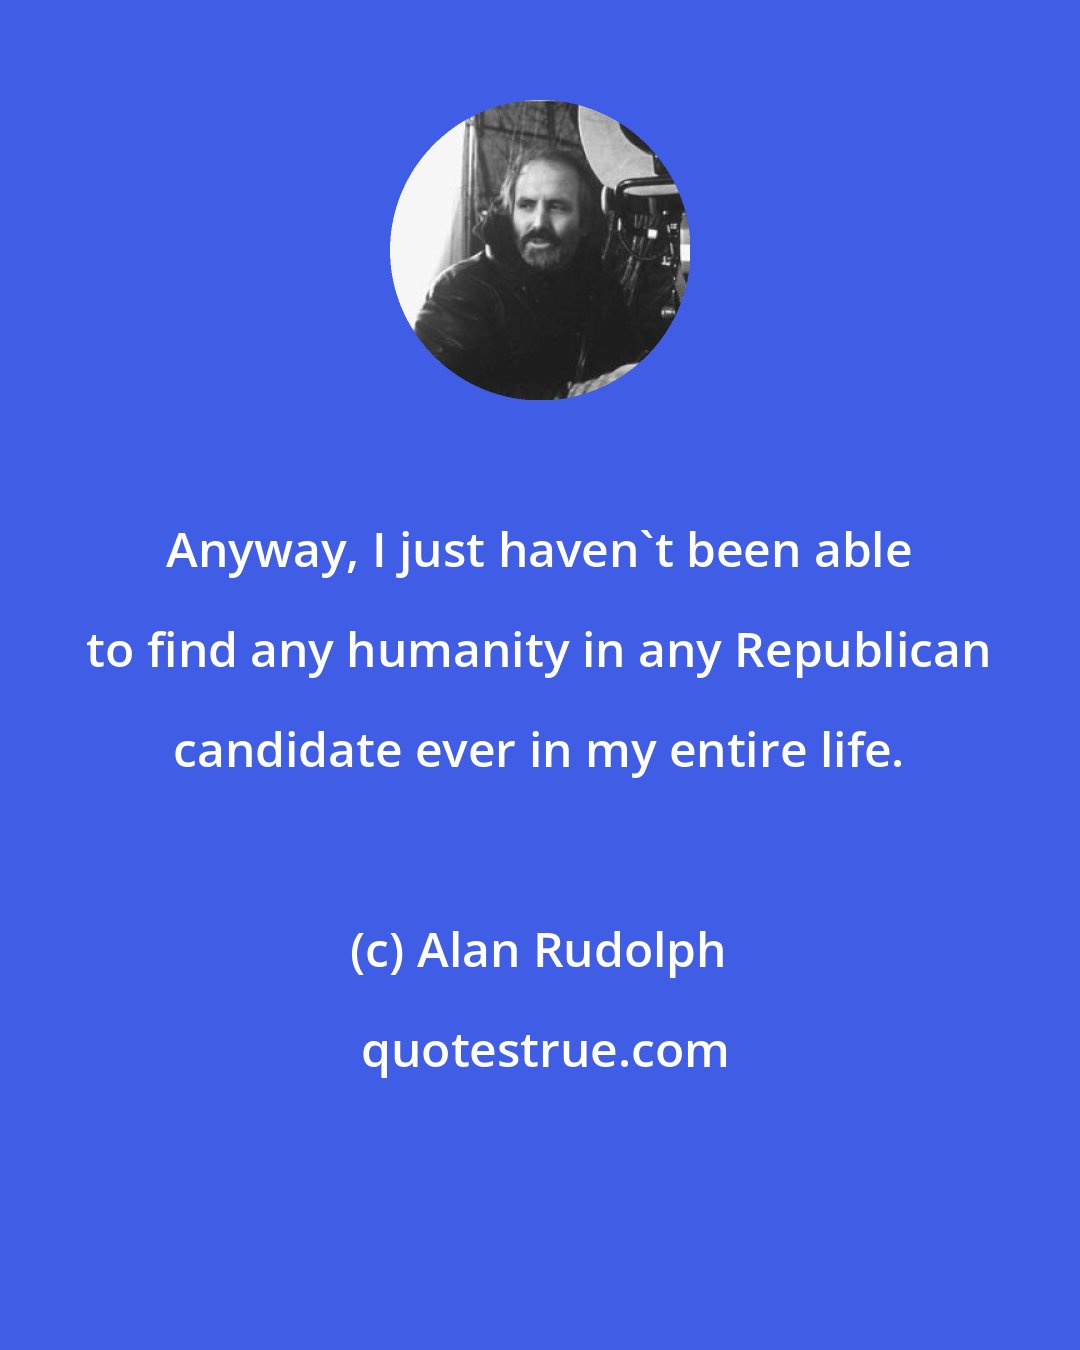 Alan Rudolph: Anyway, I just haven't been able to find any humanity in any Republican candidate ever in my entire life.